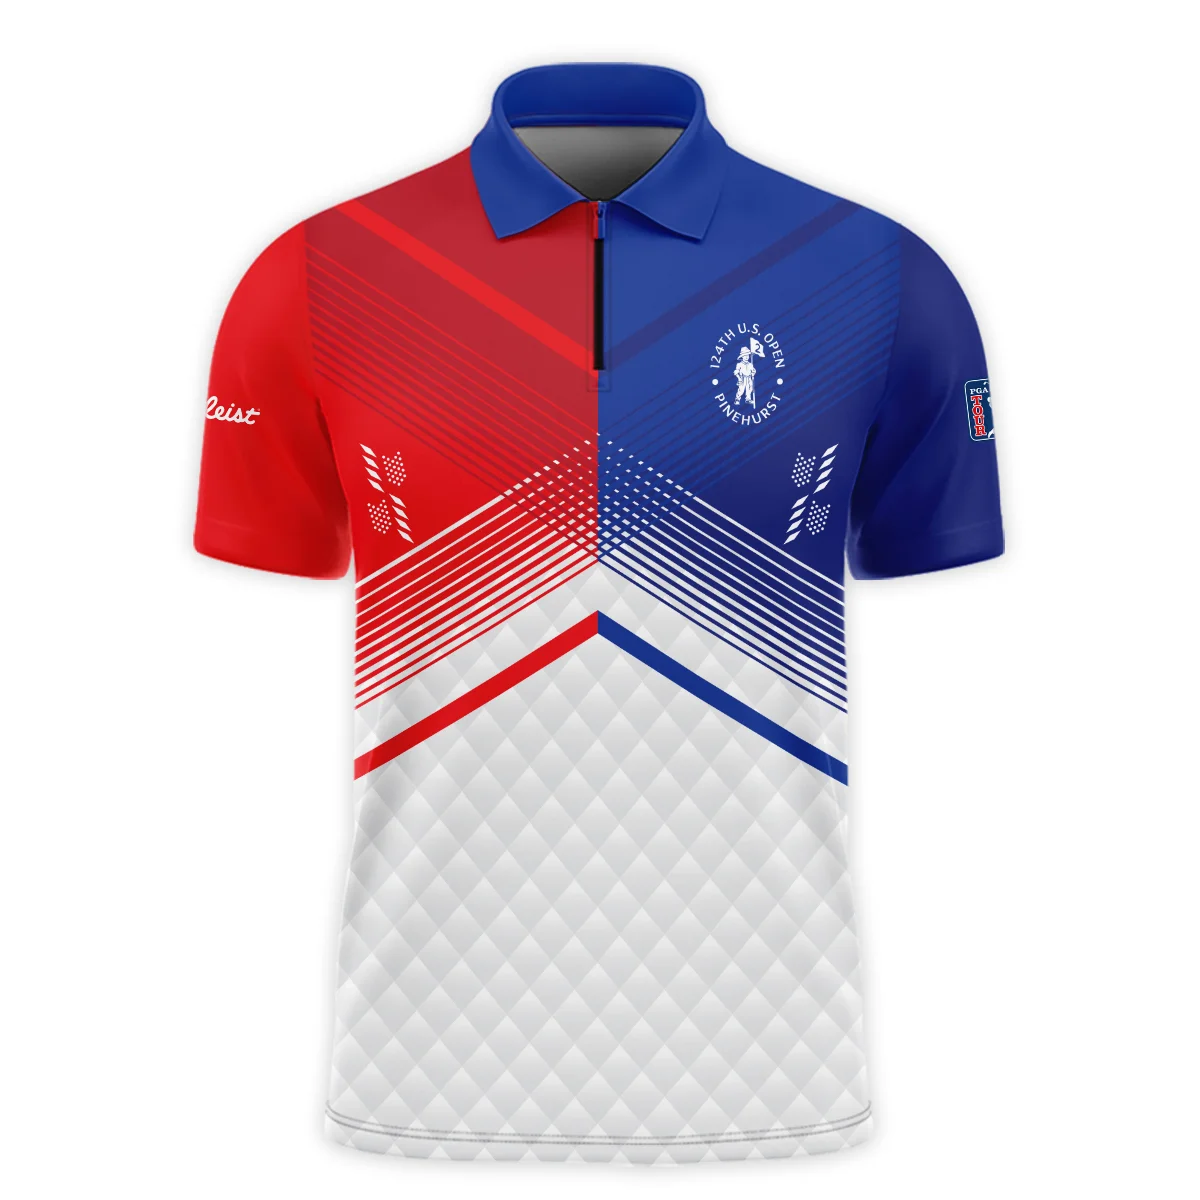 Titleist 124th U.S. Open Pinehurst Blue Red Line White Abstract Long Polo Shirt Style Classic